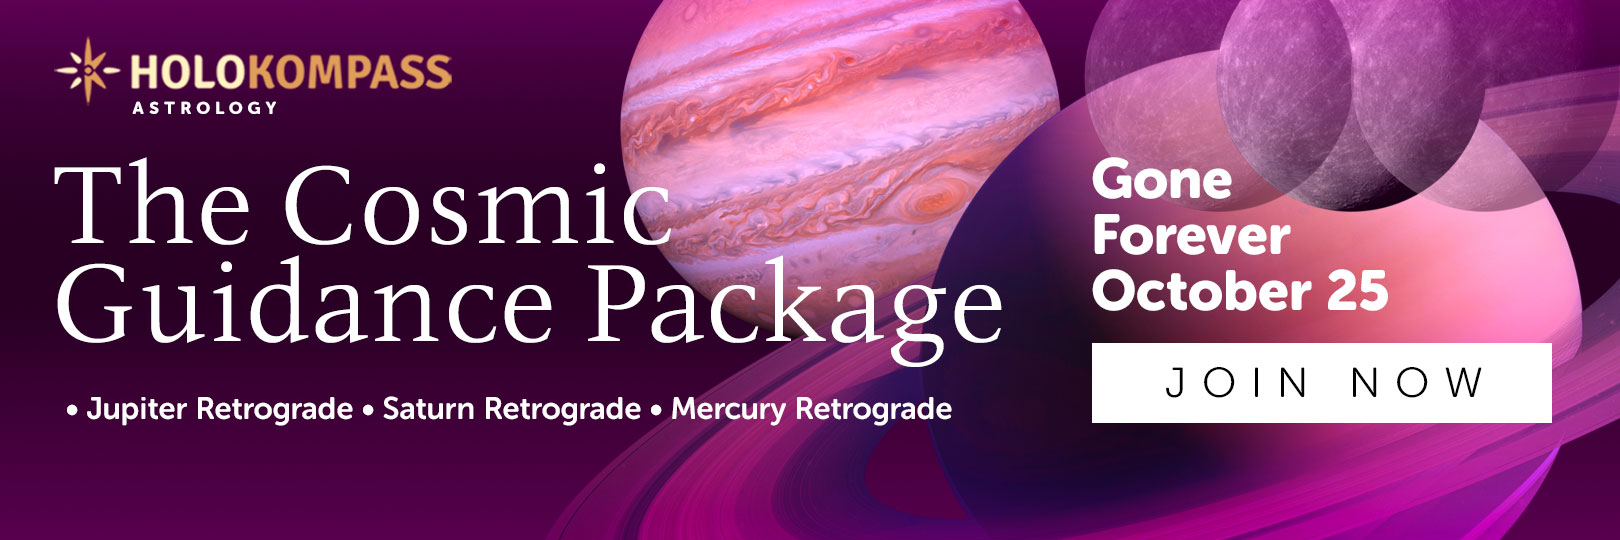 The Cosmic Guidance Package - Gone Forever Oct. 25! Join Now